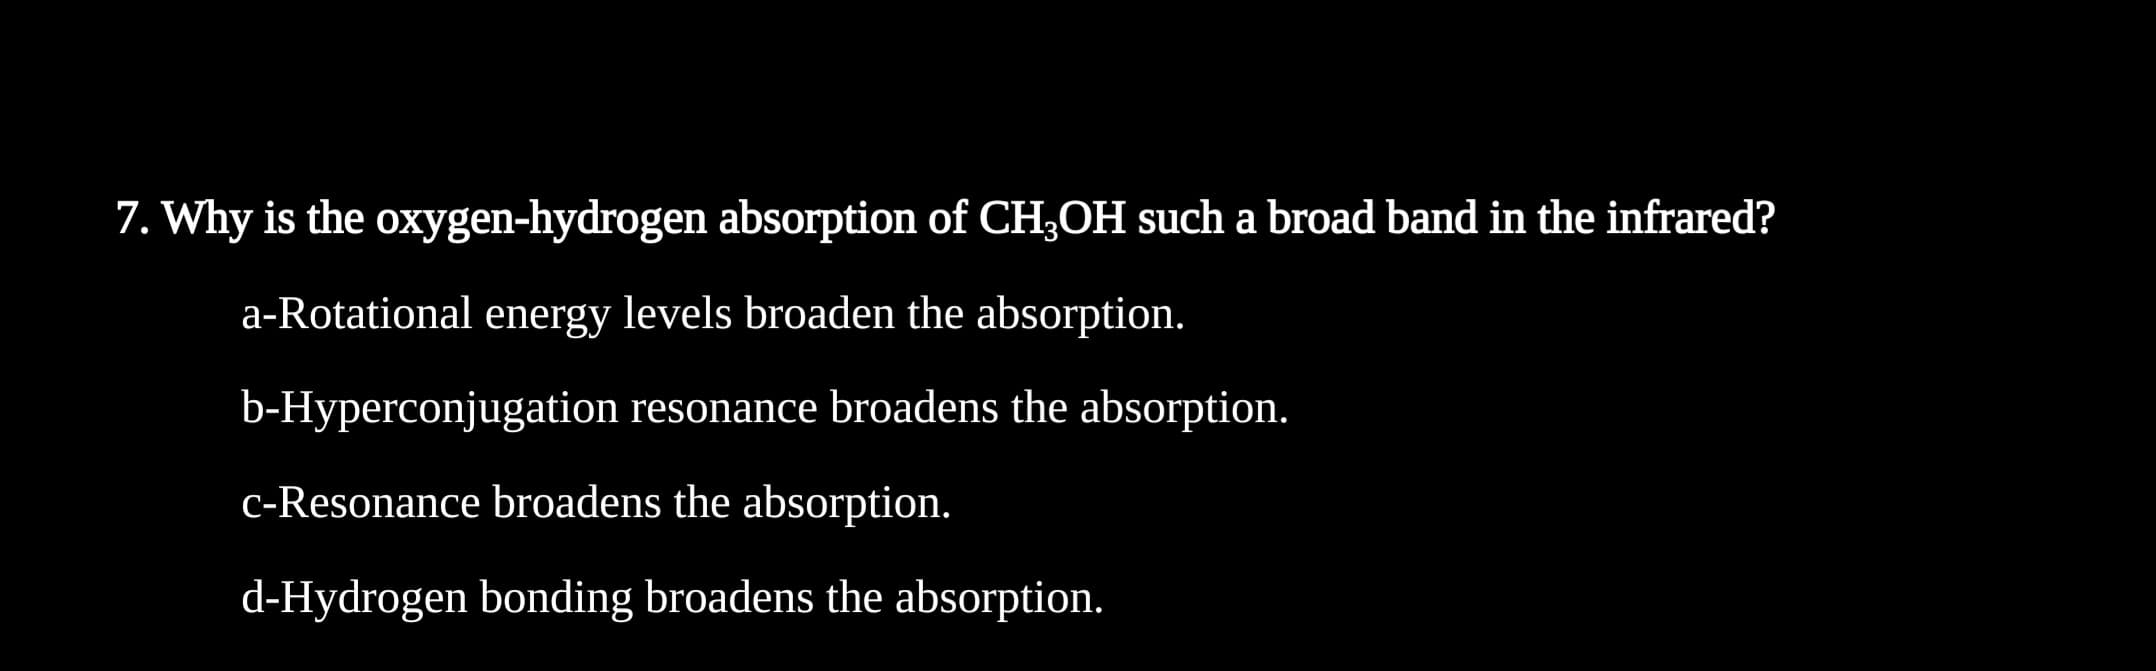 7. Why is the oxygen-hydrogen absorption of CH3OH such a broad band in the infrared?
a-Rotational energy levels broaden the absorption.
b-Hyperconjugation resonance broadens the absorption.
c-Resonance broadens the absorption.
d-Hydrogen bonding broadens the absorption.